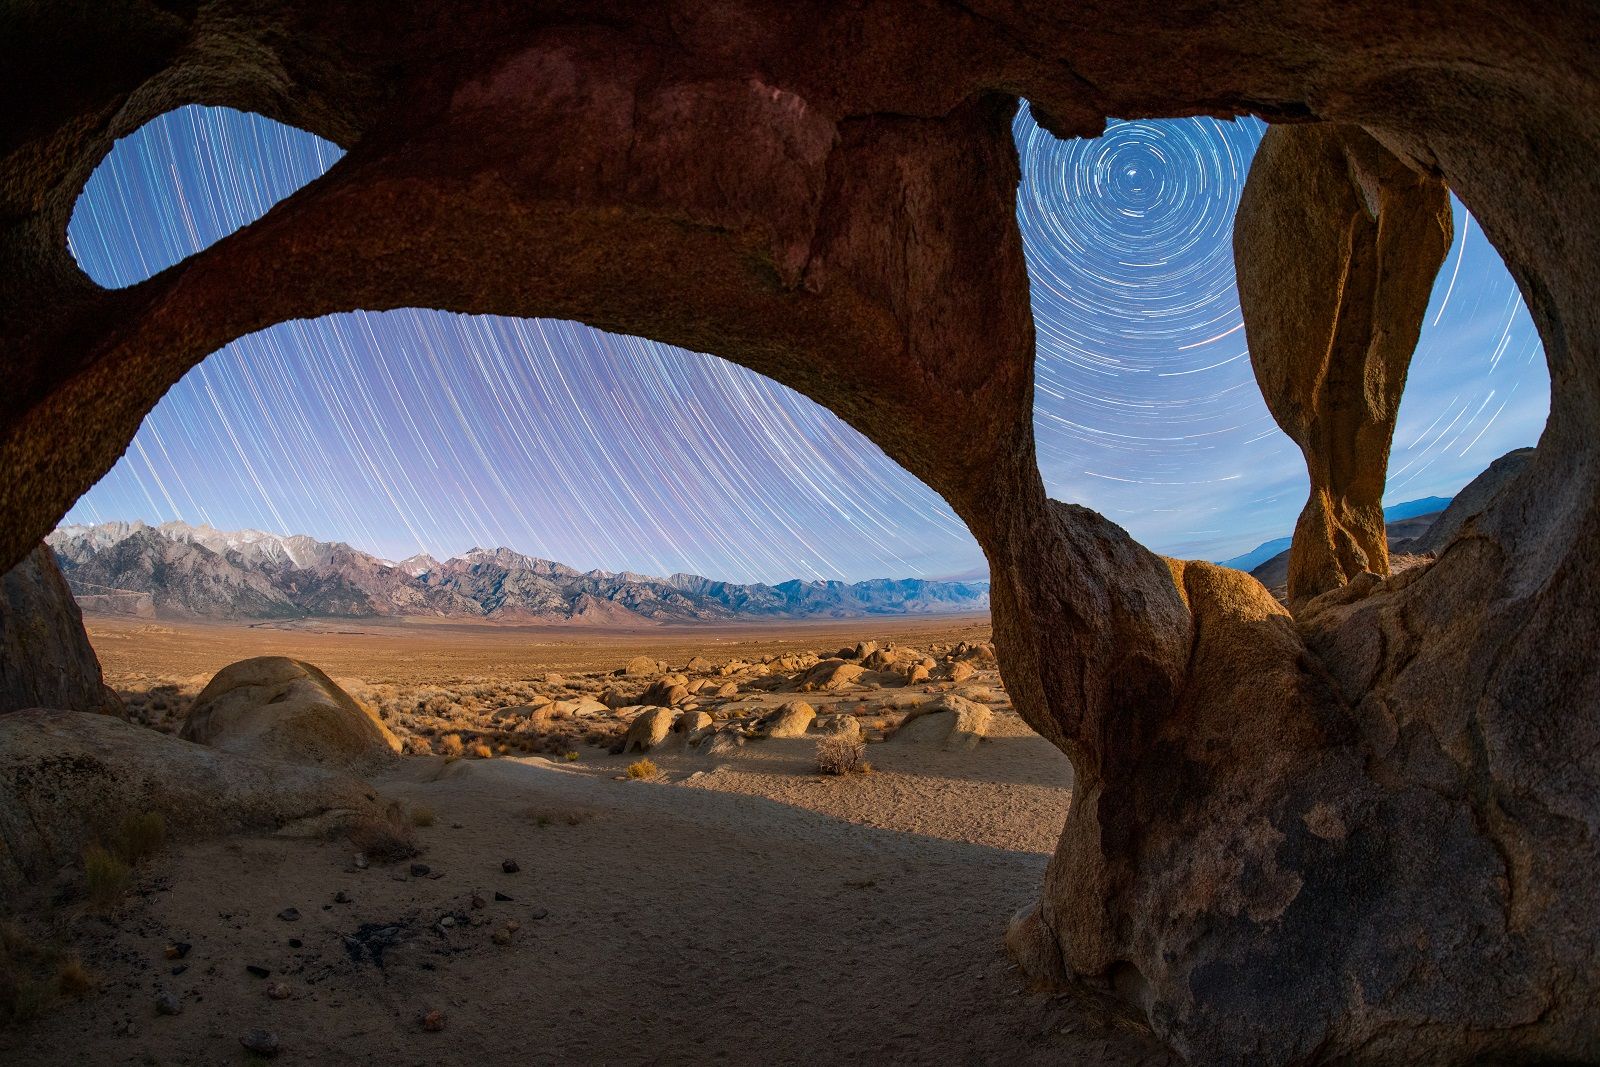 Check out these stunning photos from the 2020 Astronomy Photographer of the Year award photo 49